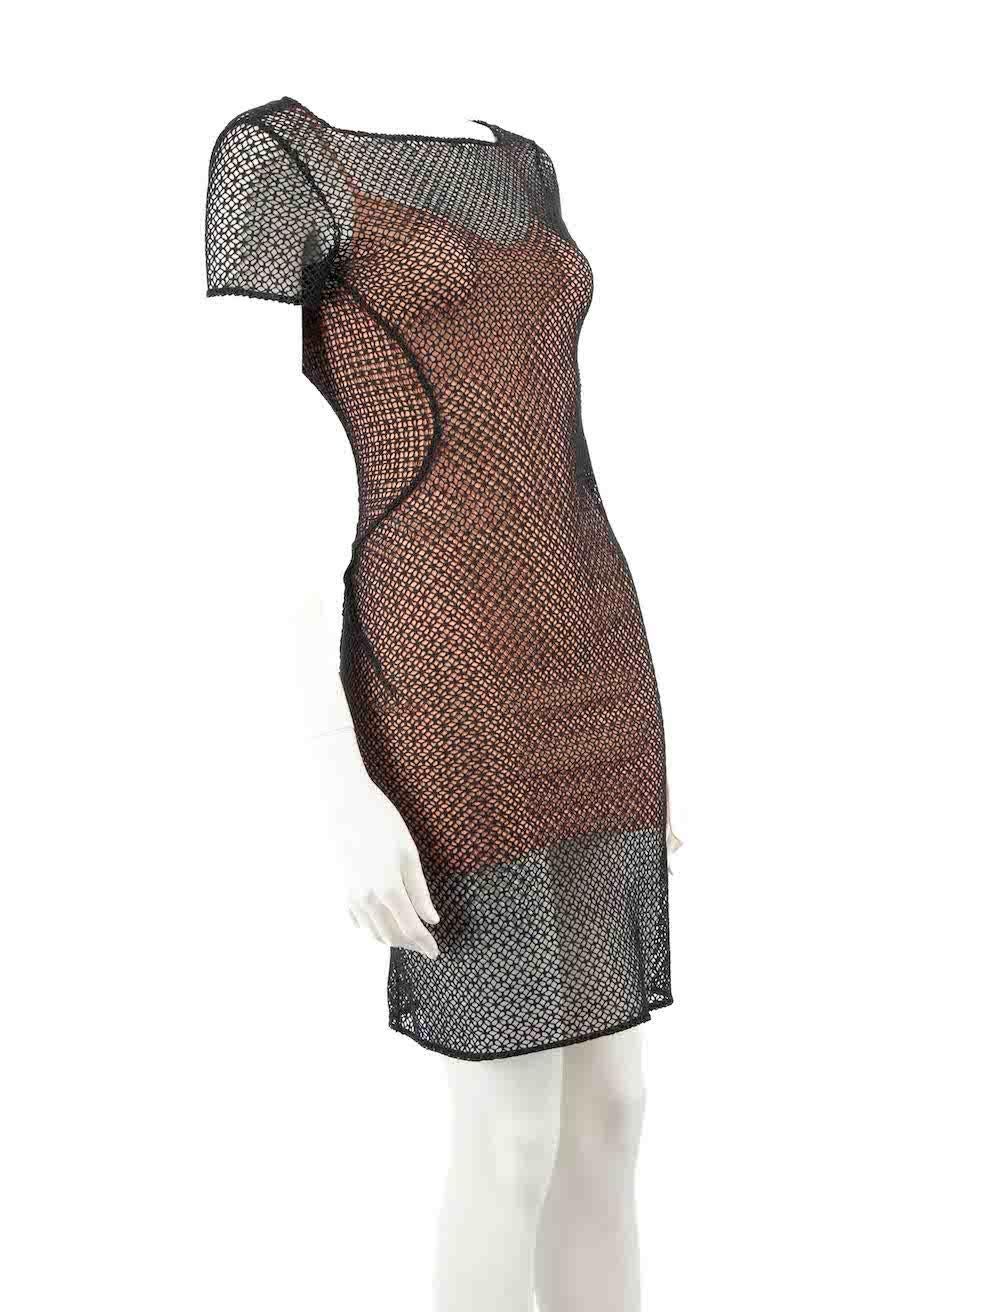 CONDITION is Never worn, with tags. No visible wear to dress is evident on this new Pierre Mantoux for Alaïa designer resale item.
 
 
 
 Details
 
 
 Black
 
 Polyester lace
 
 Dress
 
 Mini
 
 See through
 
 Round neck
 
 Figure hugging fit
 
